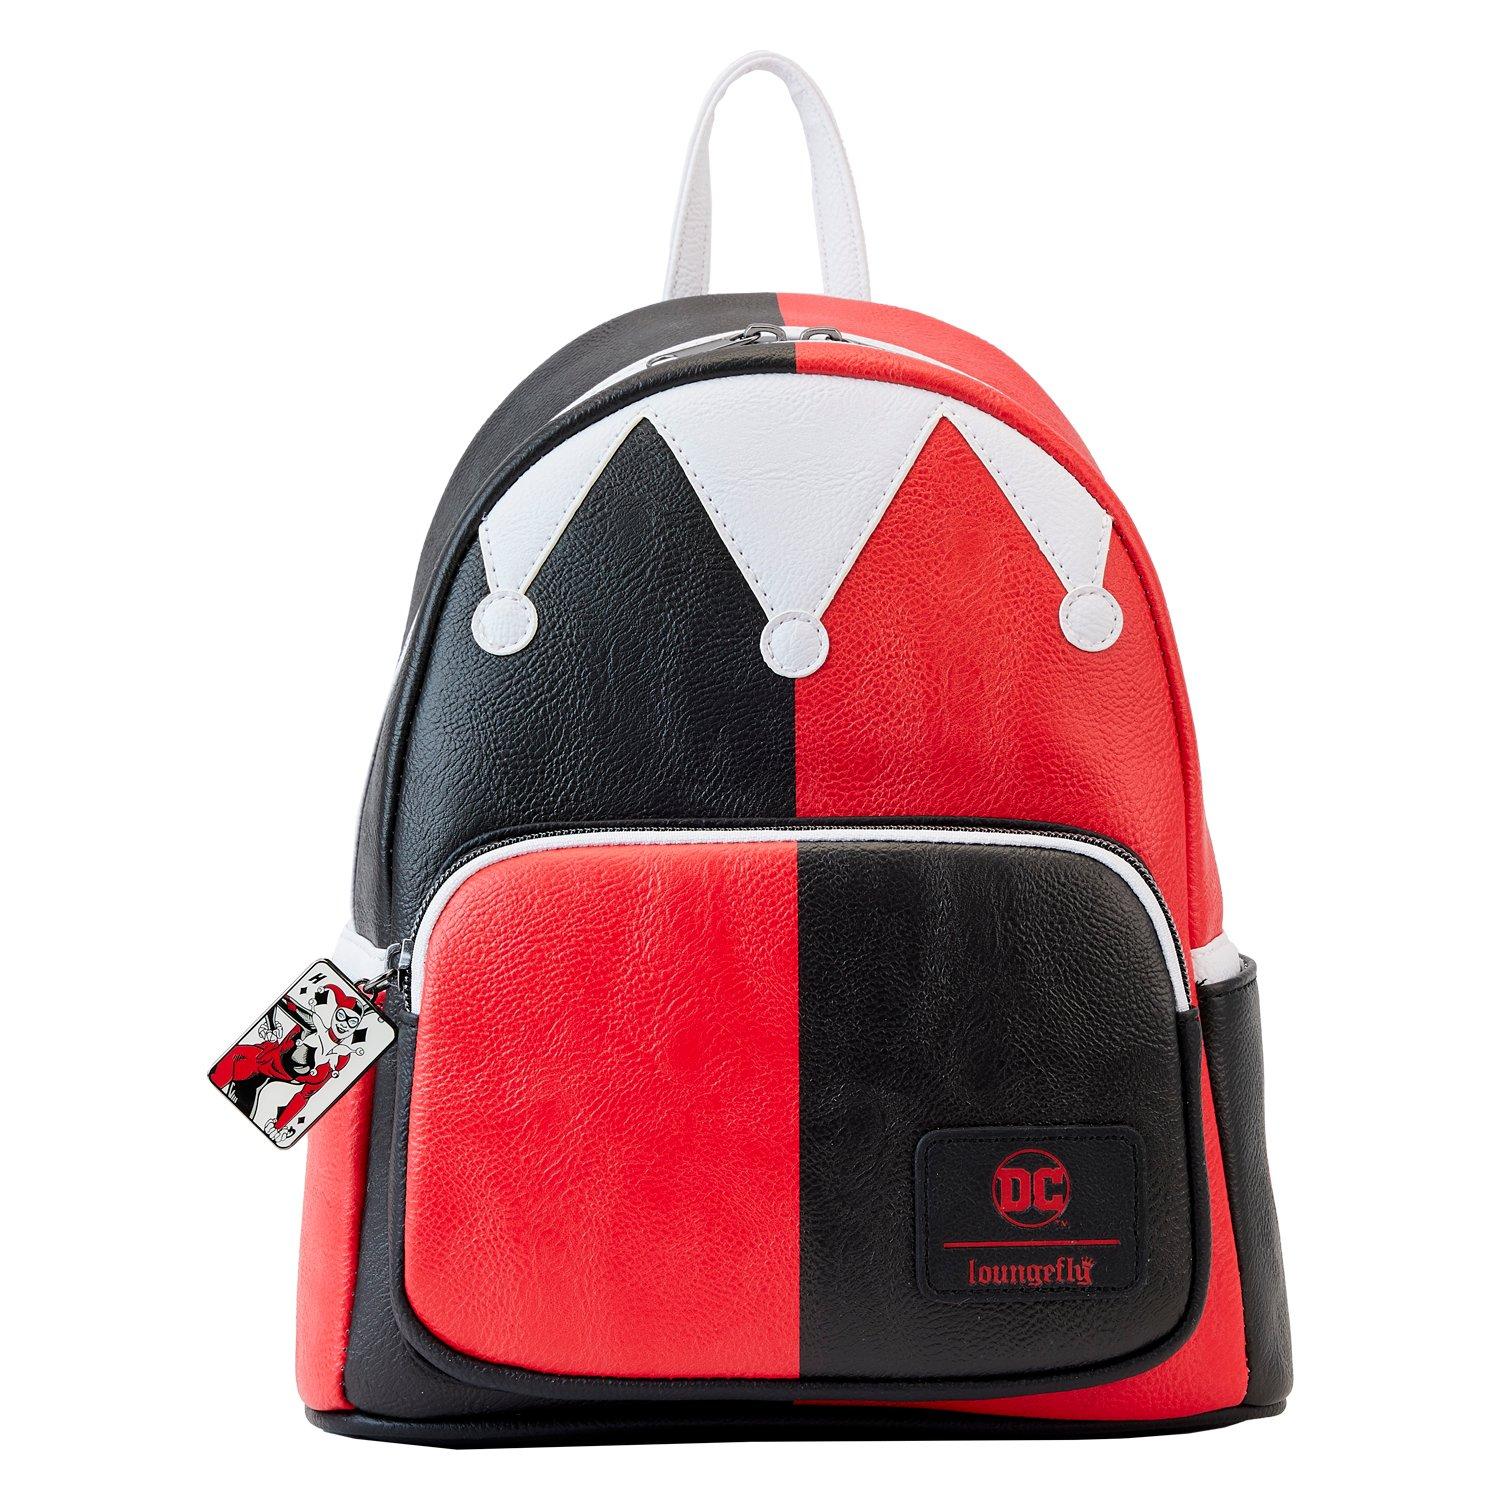  Loungefly Pikachu Faux Leather Mini Backpack Standard